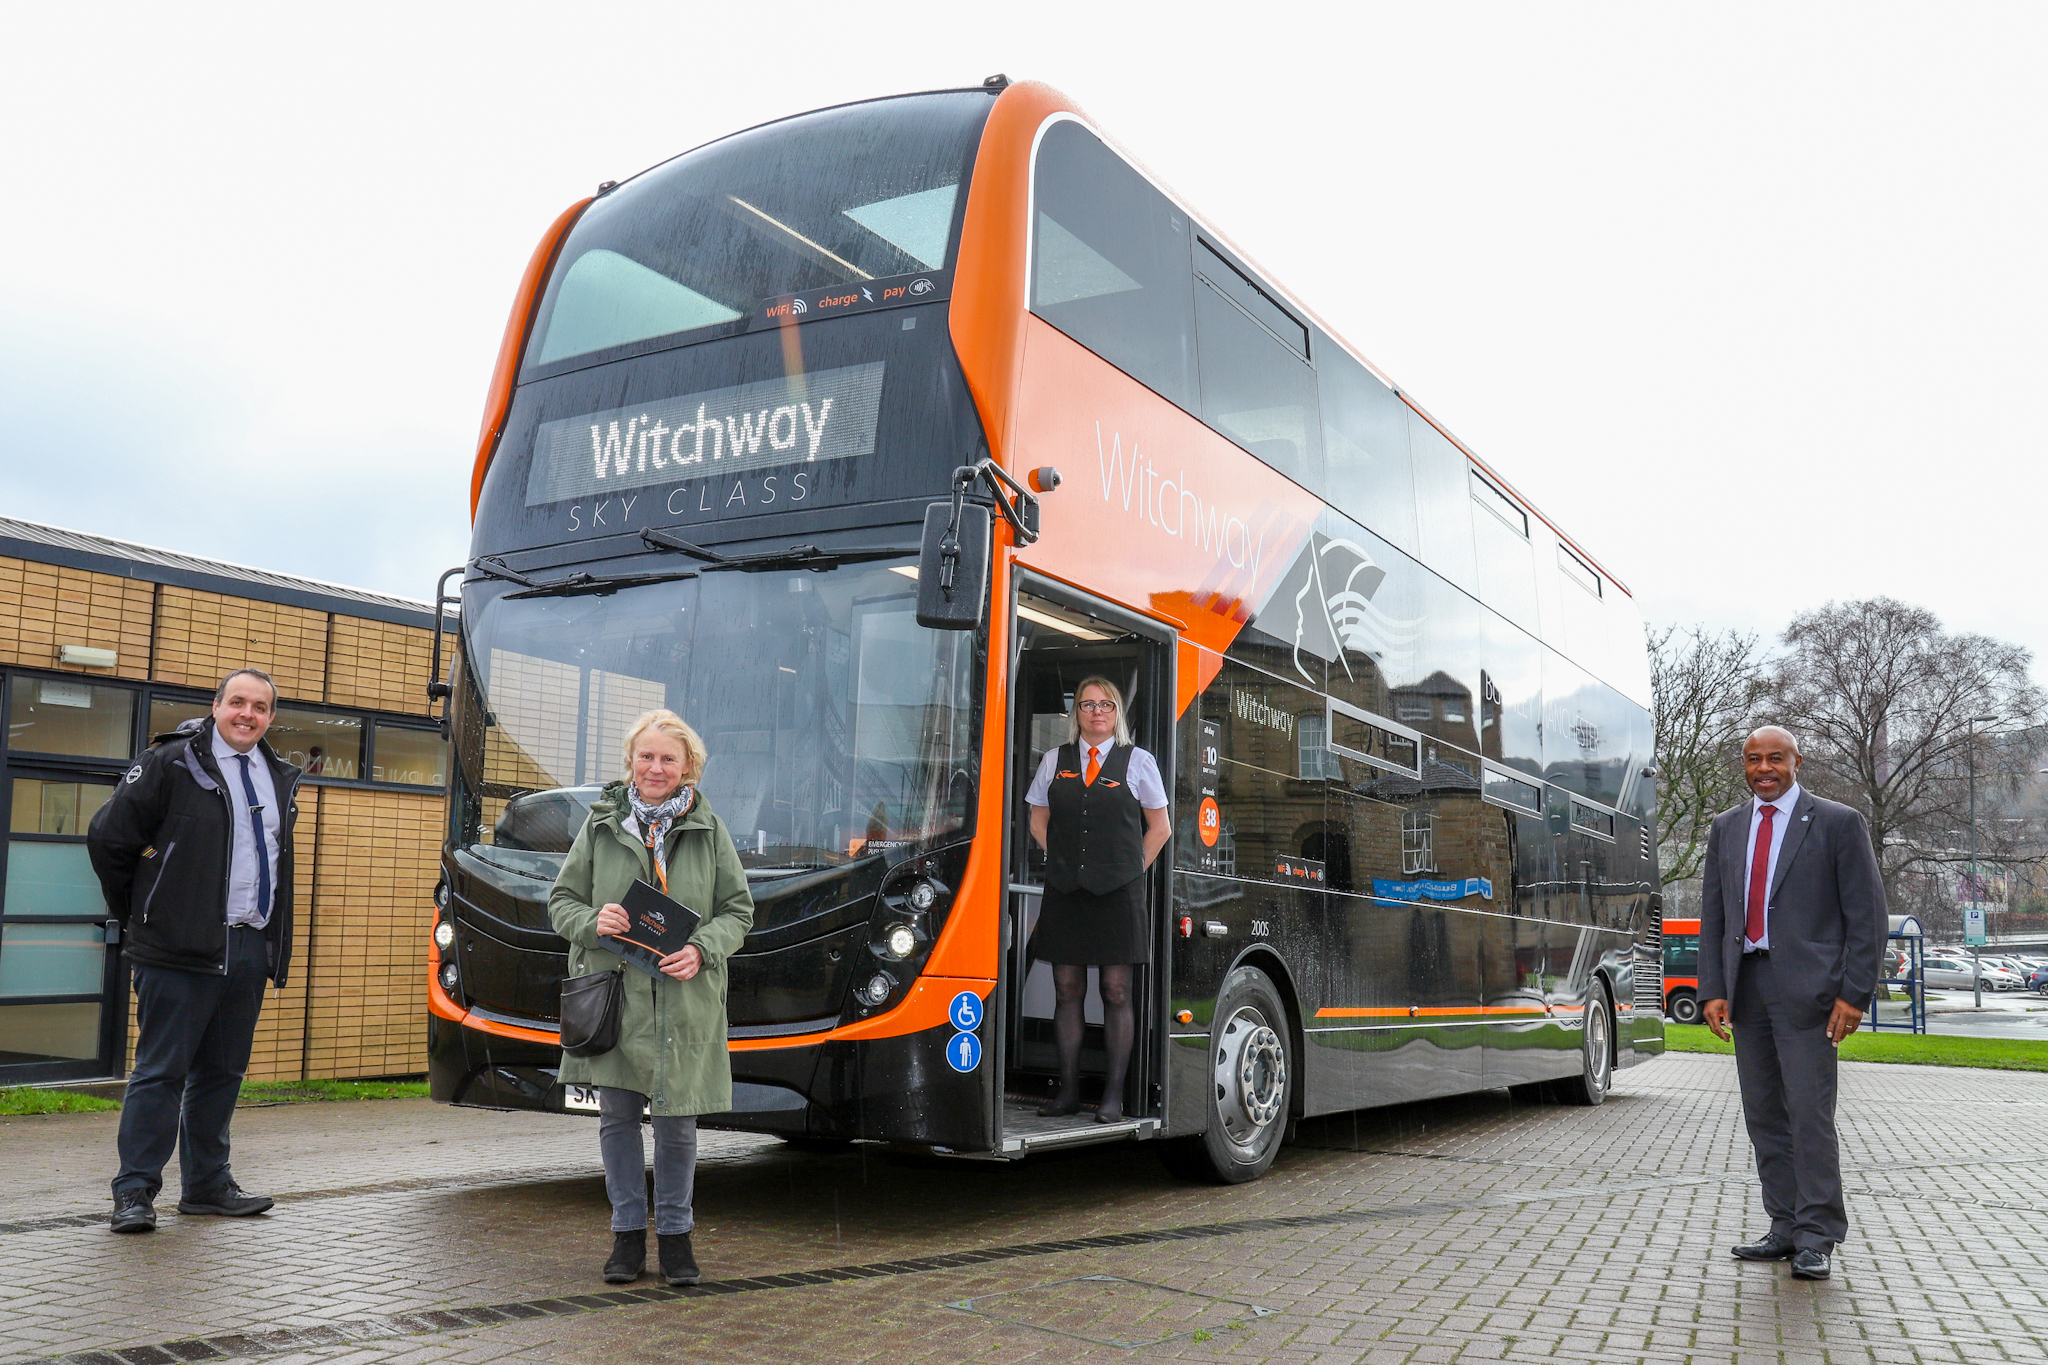 Transdev invests £3.8m in Witchway